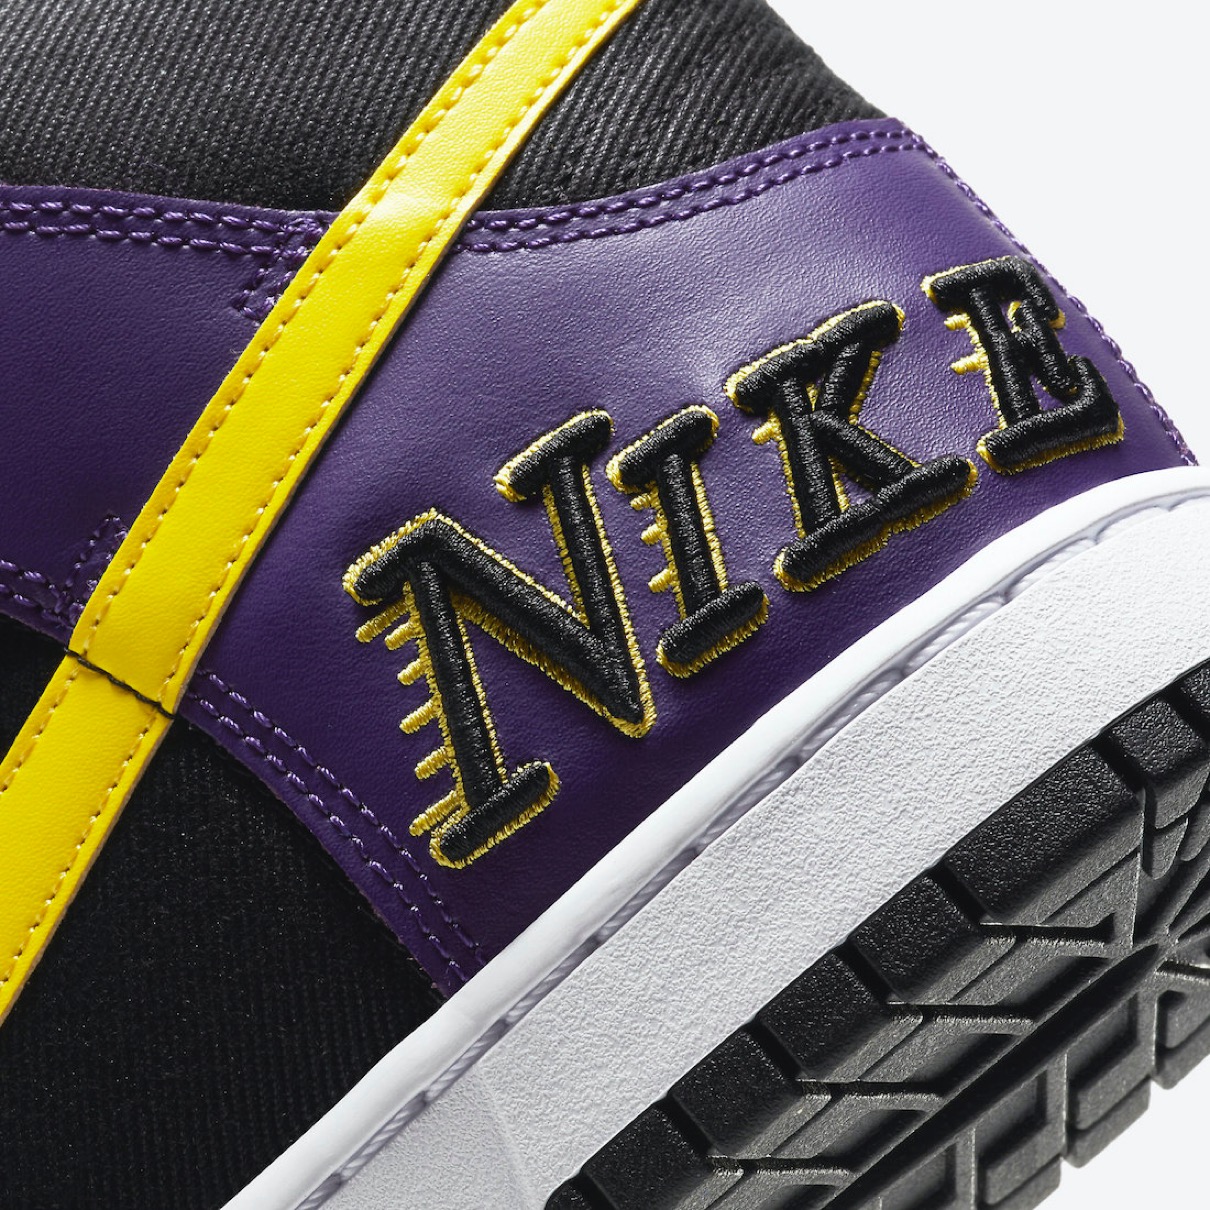 Nike】Dunk High PRM EMB “Lakers”が国内4月29日に発売予定 | UP TO DATE